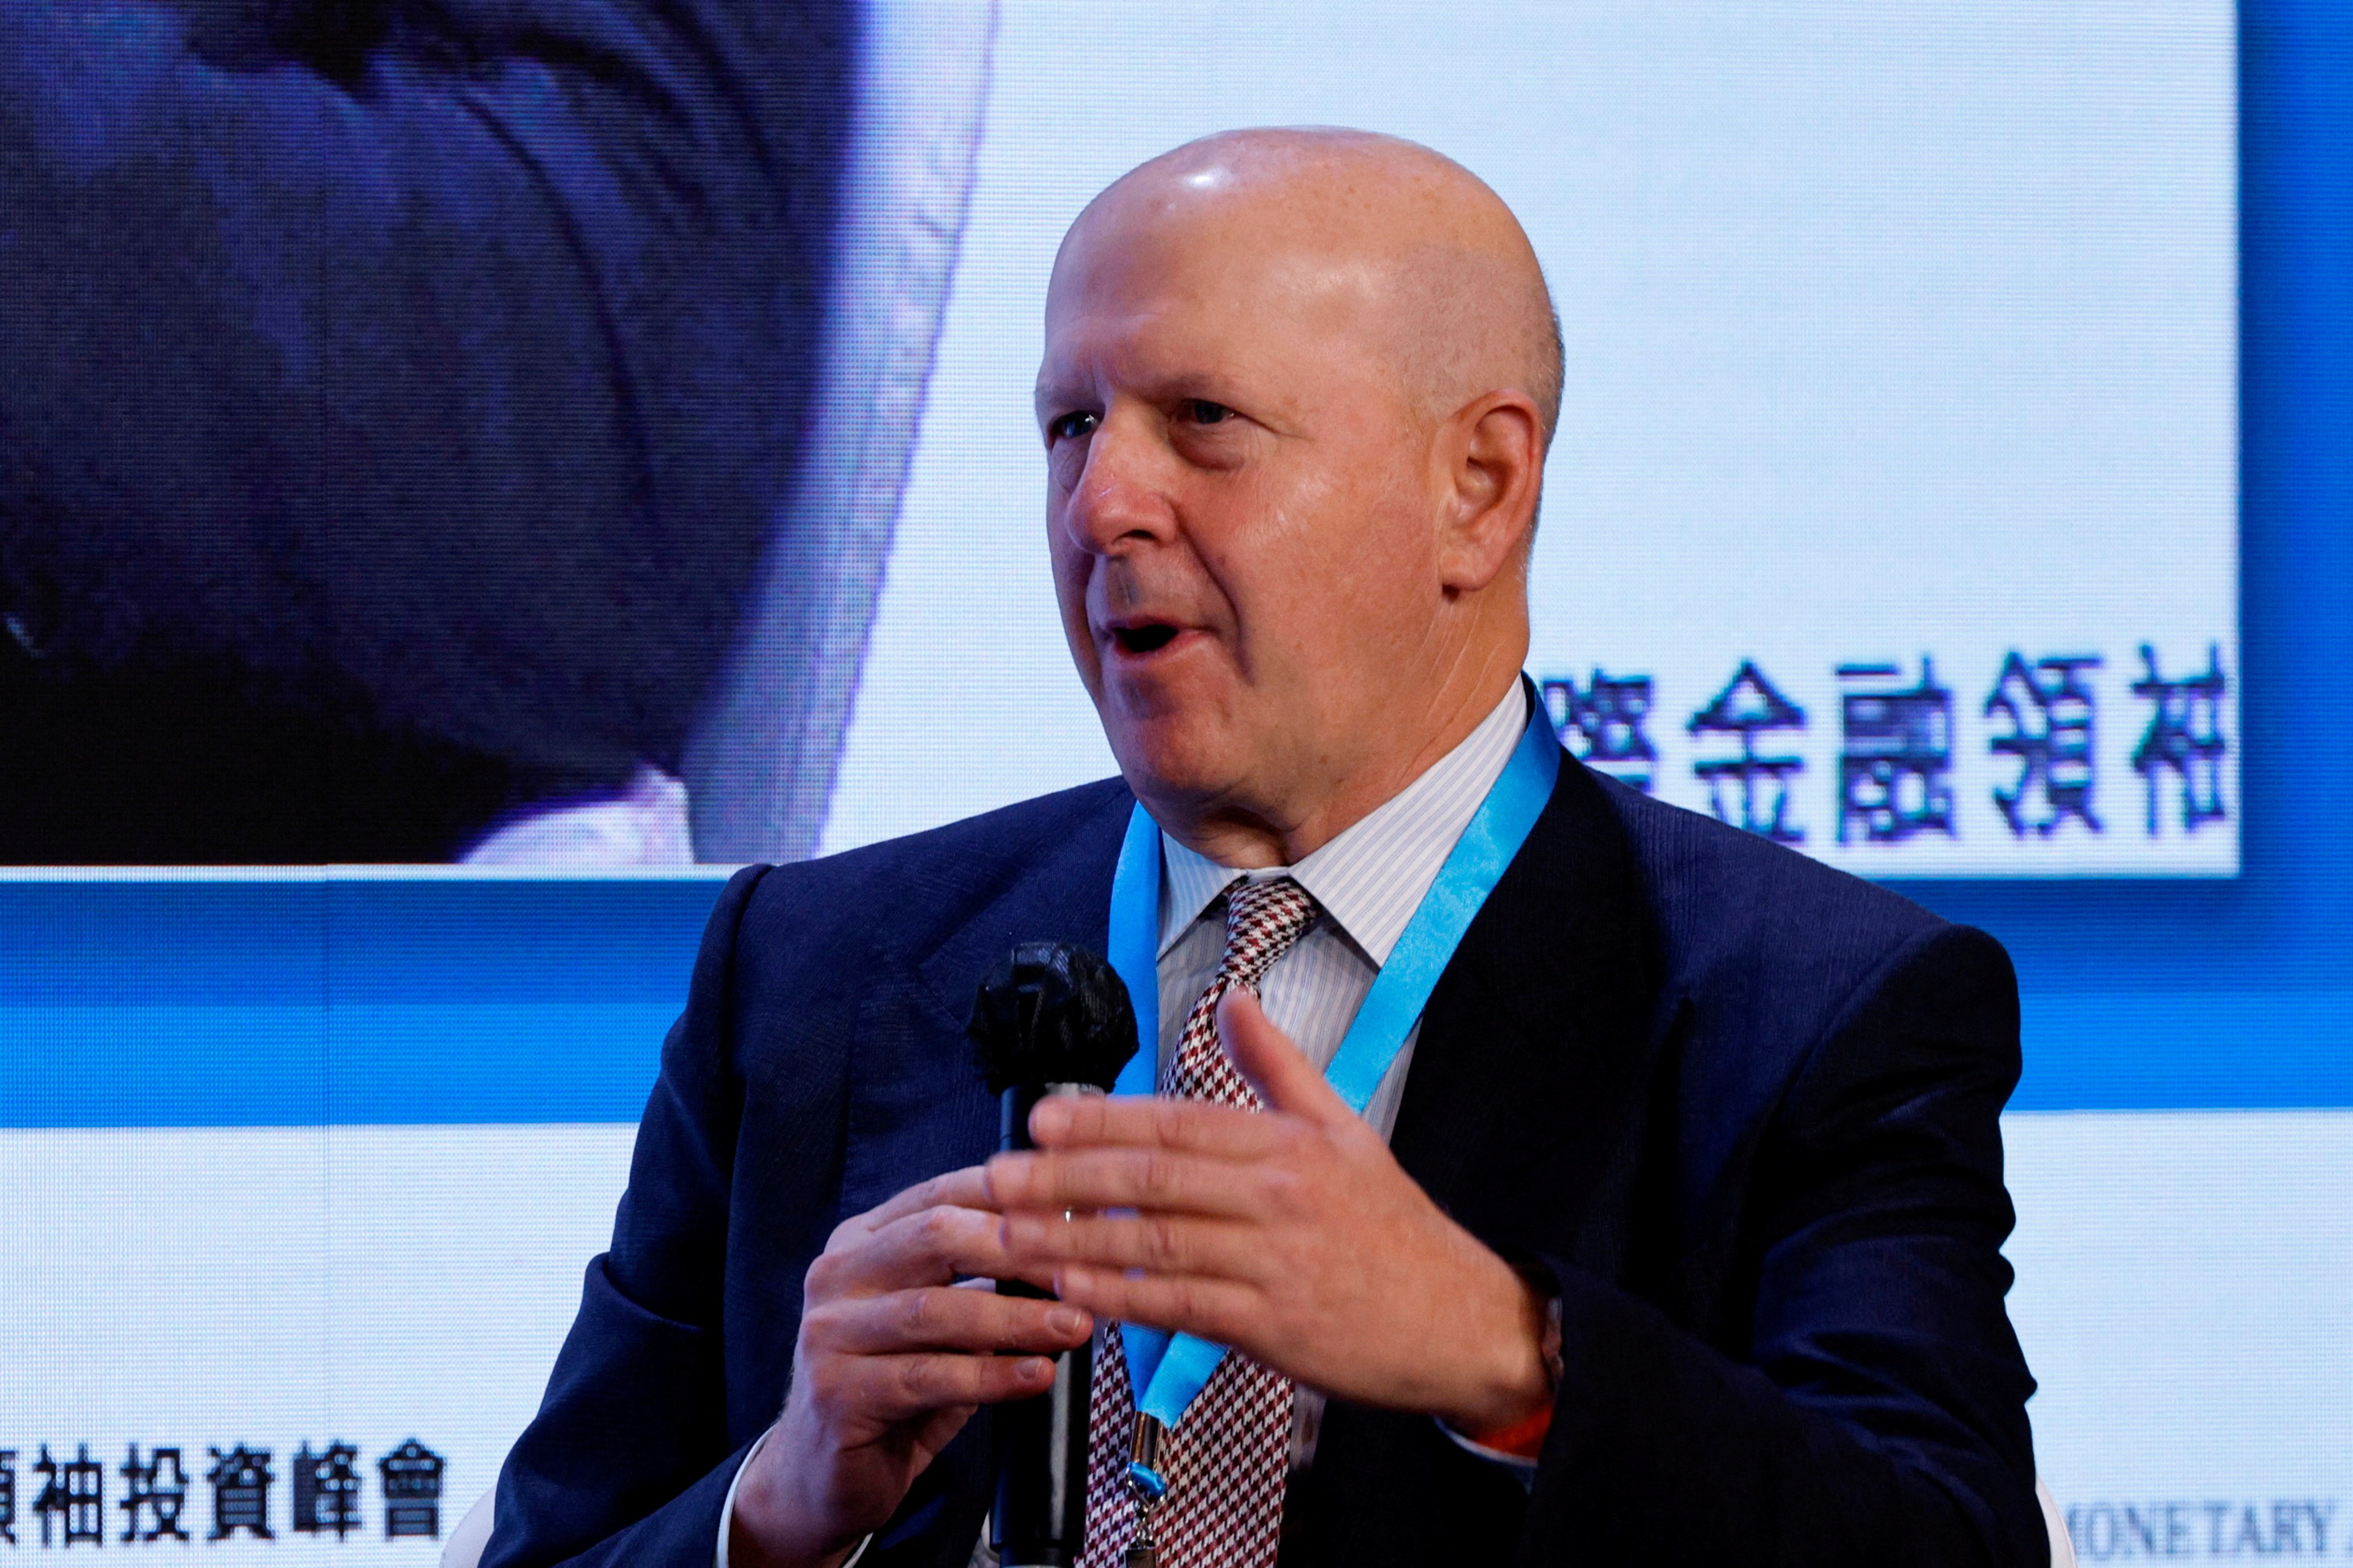 David Solomon, Chief Executive Officer of Goldman Sachs, speaks during the Global Financial Leaders Investment Summit in Hong Kong